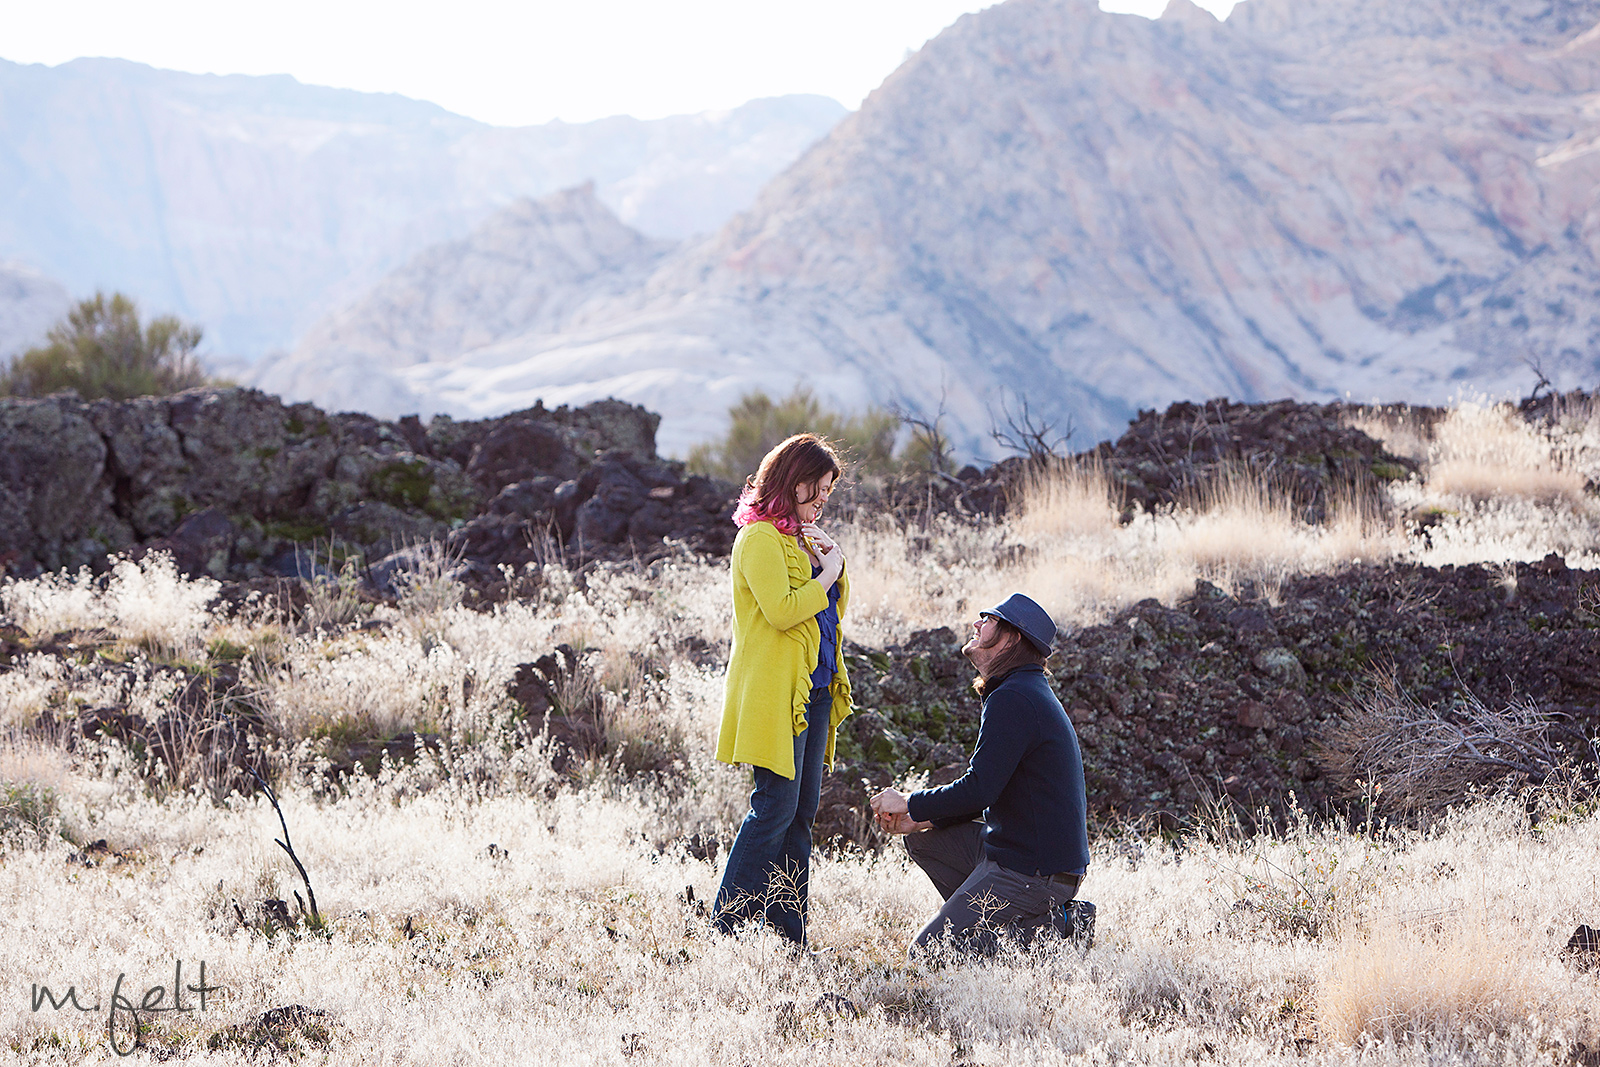 Russell Proposing to Ingrid - Southern Utah Engagement - M Felt Photography - www.mfeltphotography.com